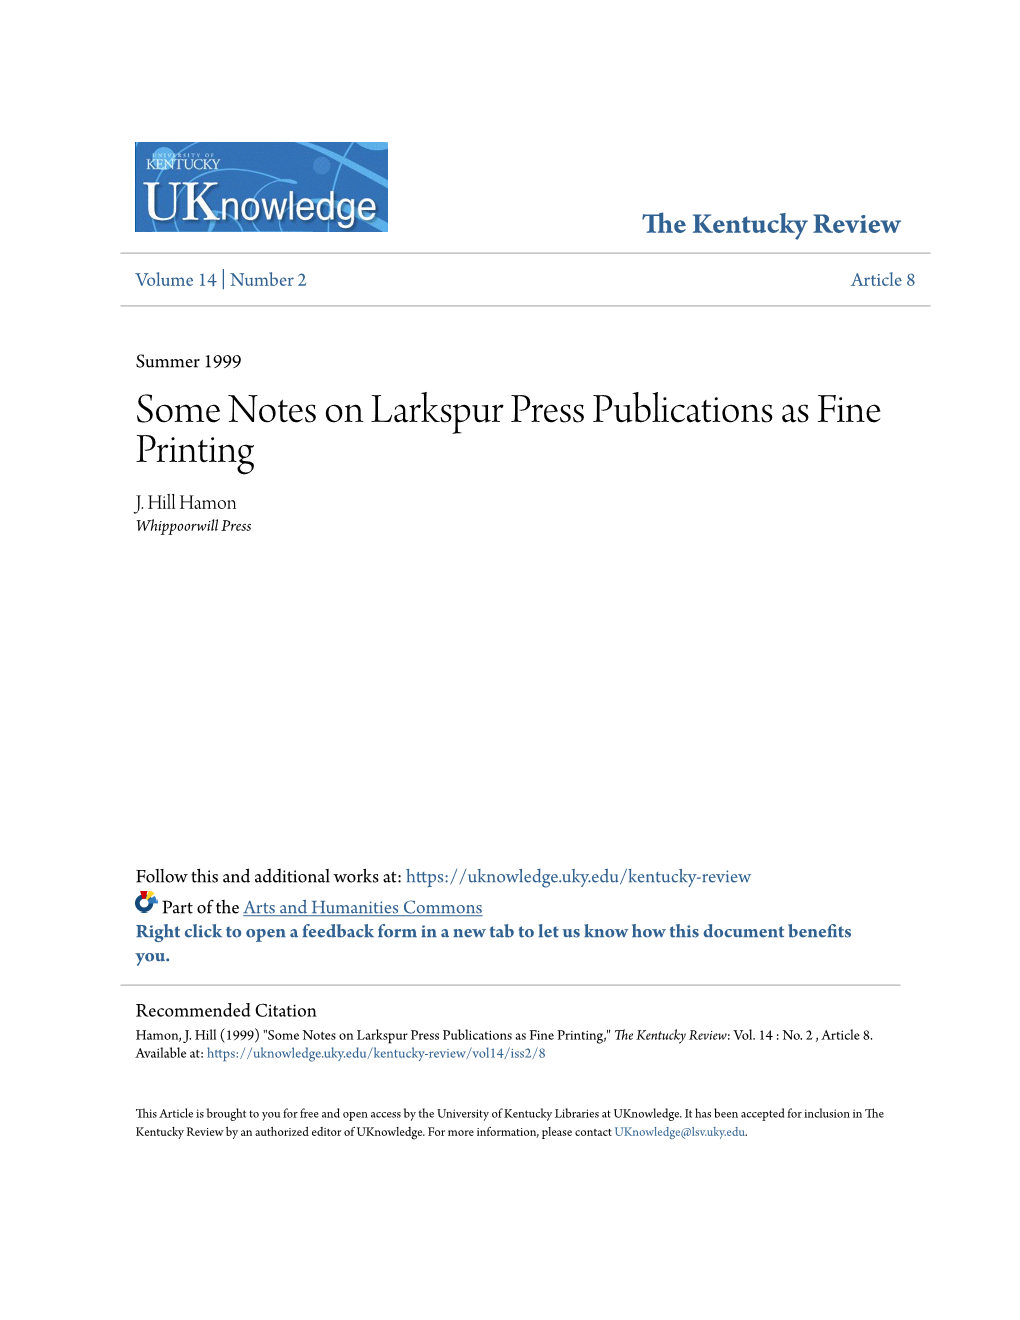 Some Notes on Larkspur Press Publications As Fine Printing J